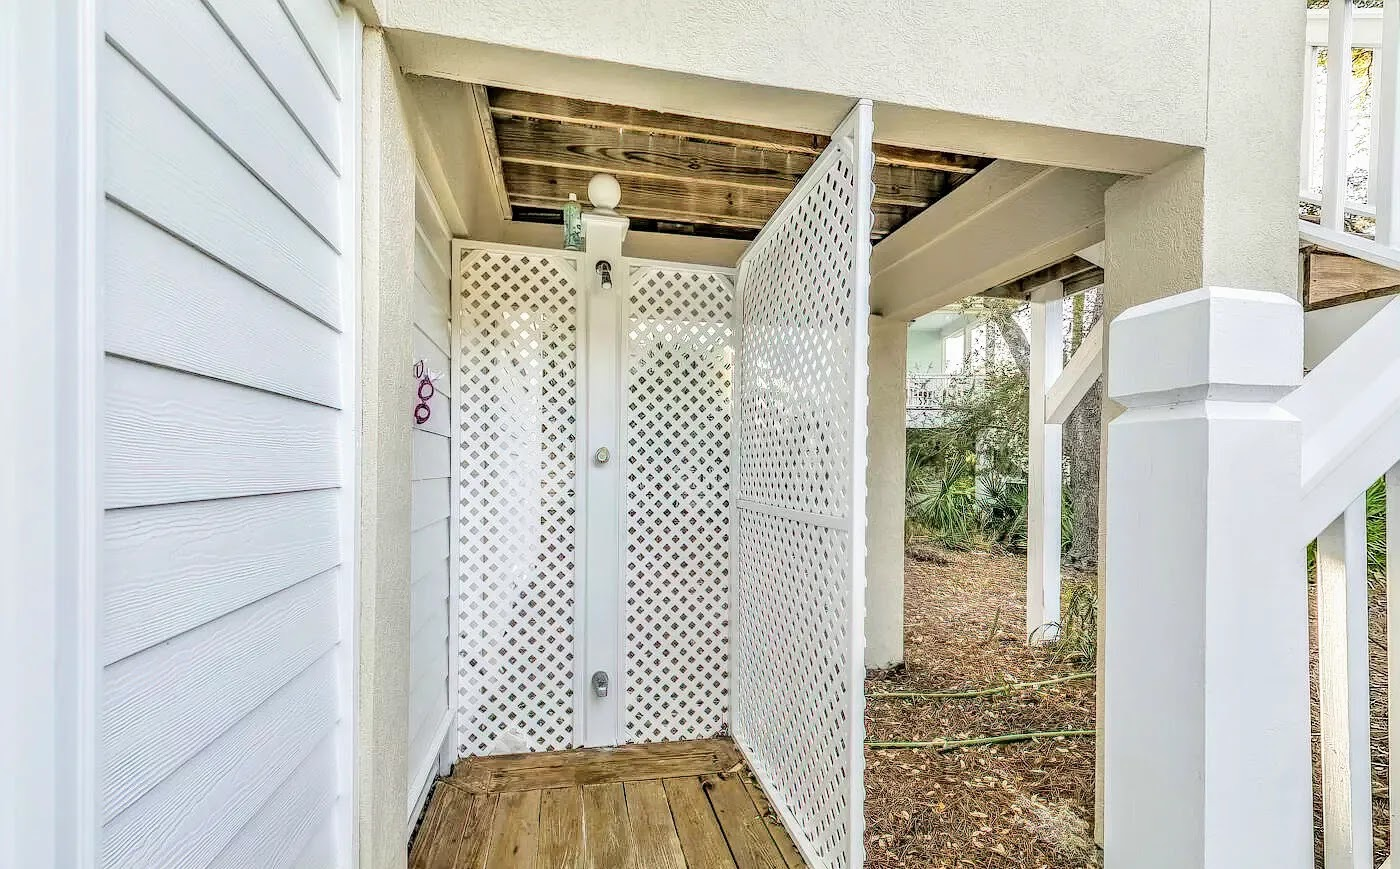 Outdoor shower to rinse off the sand or salt water from your day's adventure